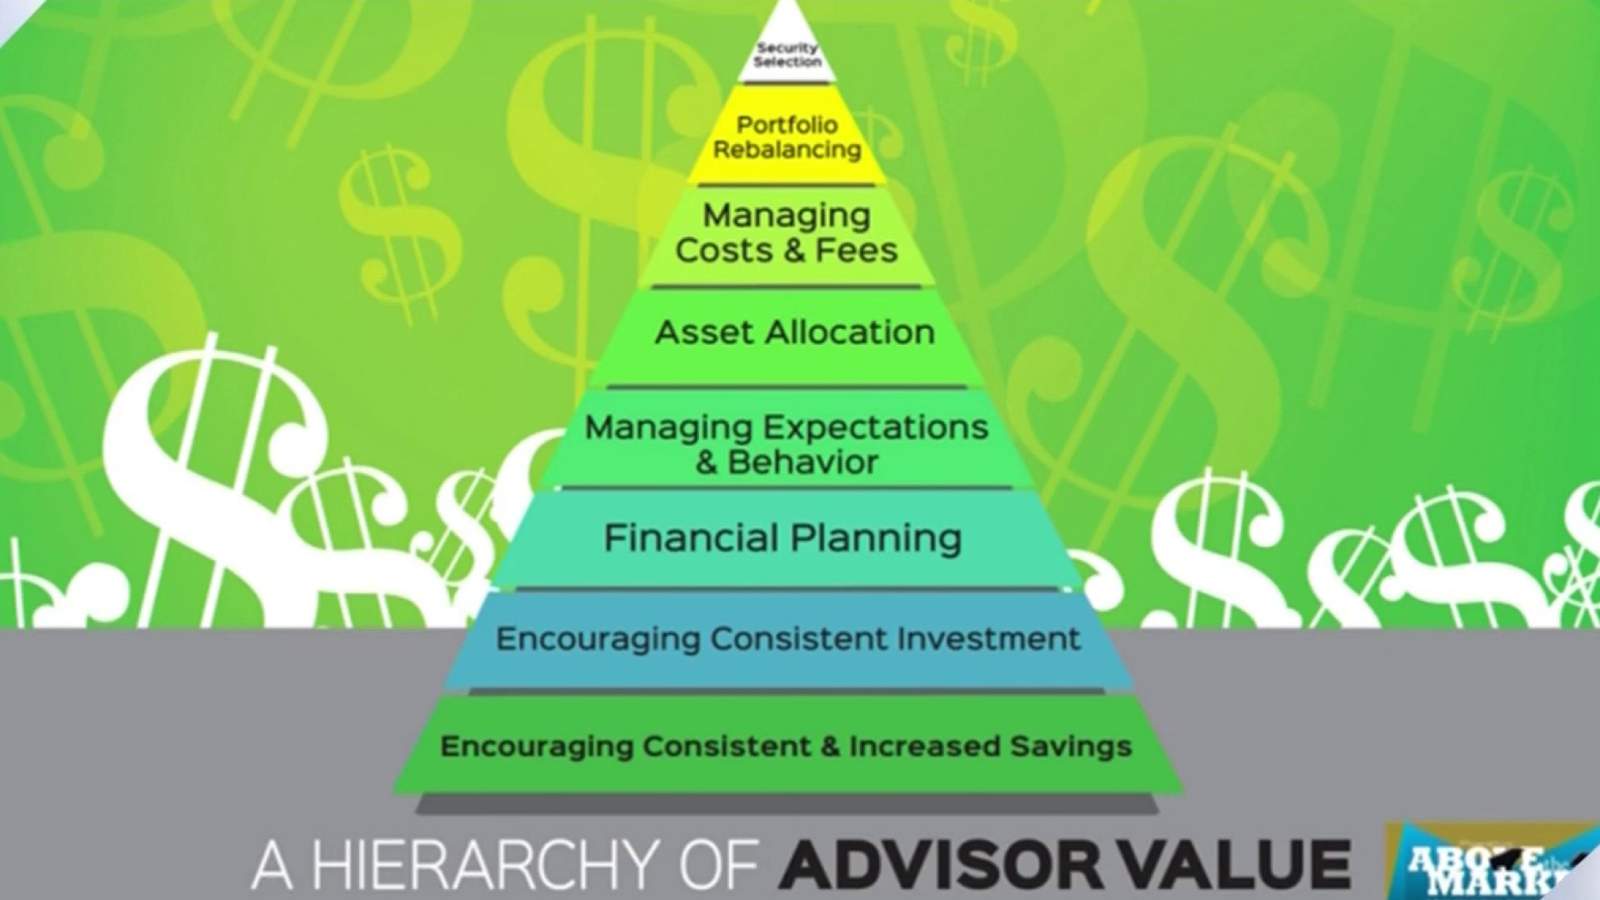 Without a financial advisor, your investments are likely not making as much money